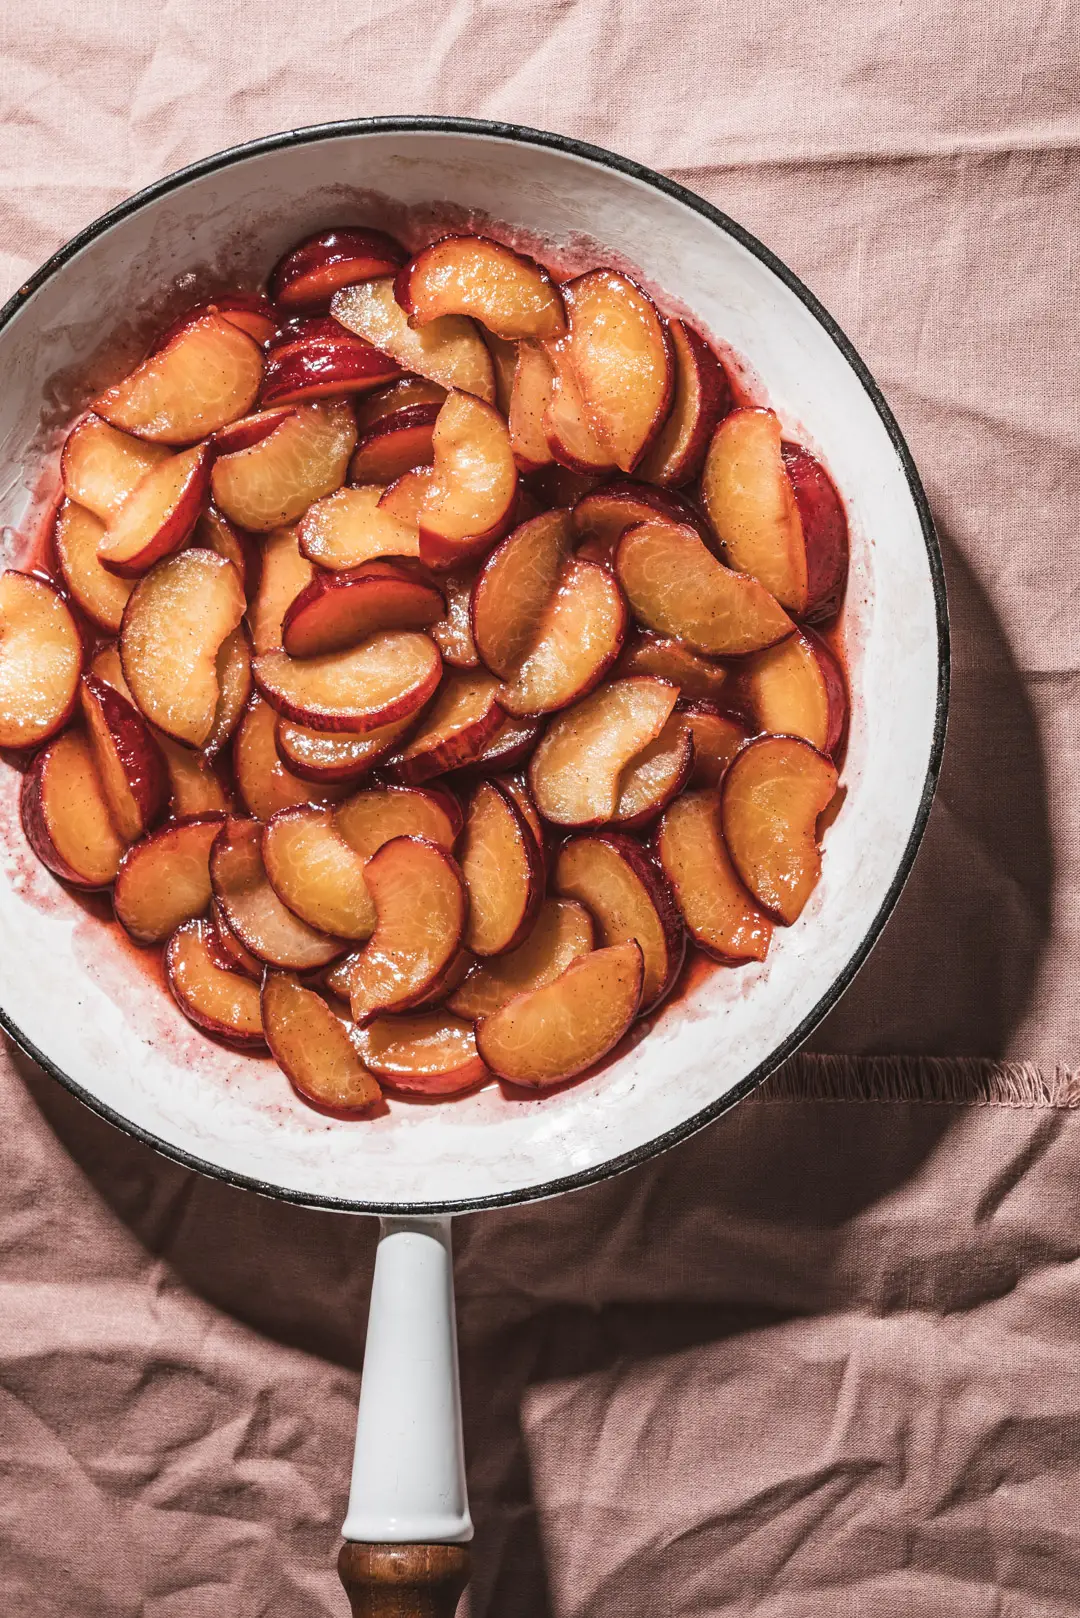 Sautéeing plums in a bit of butter, honey & vanilla is the simplest way to transform them. They become luscious, ruby tinged jewels ready to adorn your everyday eats. Enjoy them atop a simple bowl of yogurt, ice cream, oatmeal or pancakes. These simple sautéed plums will make you reconsider simply eating a plum out of hand.